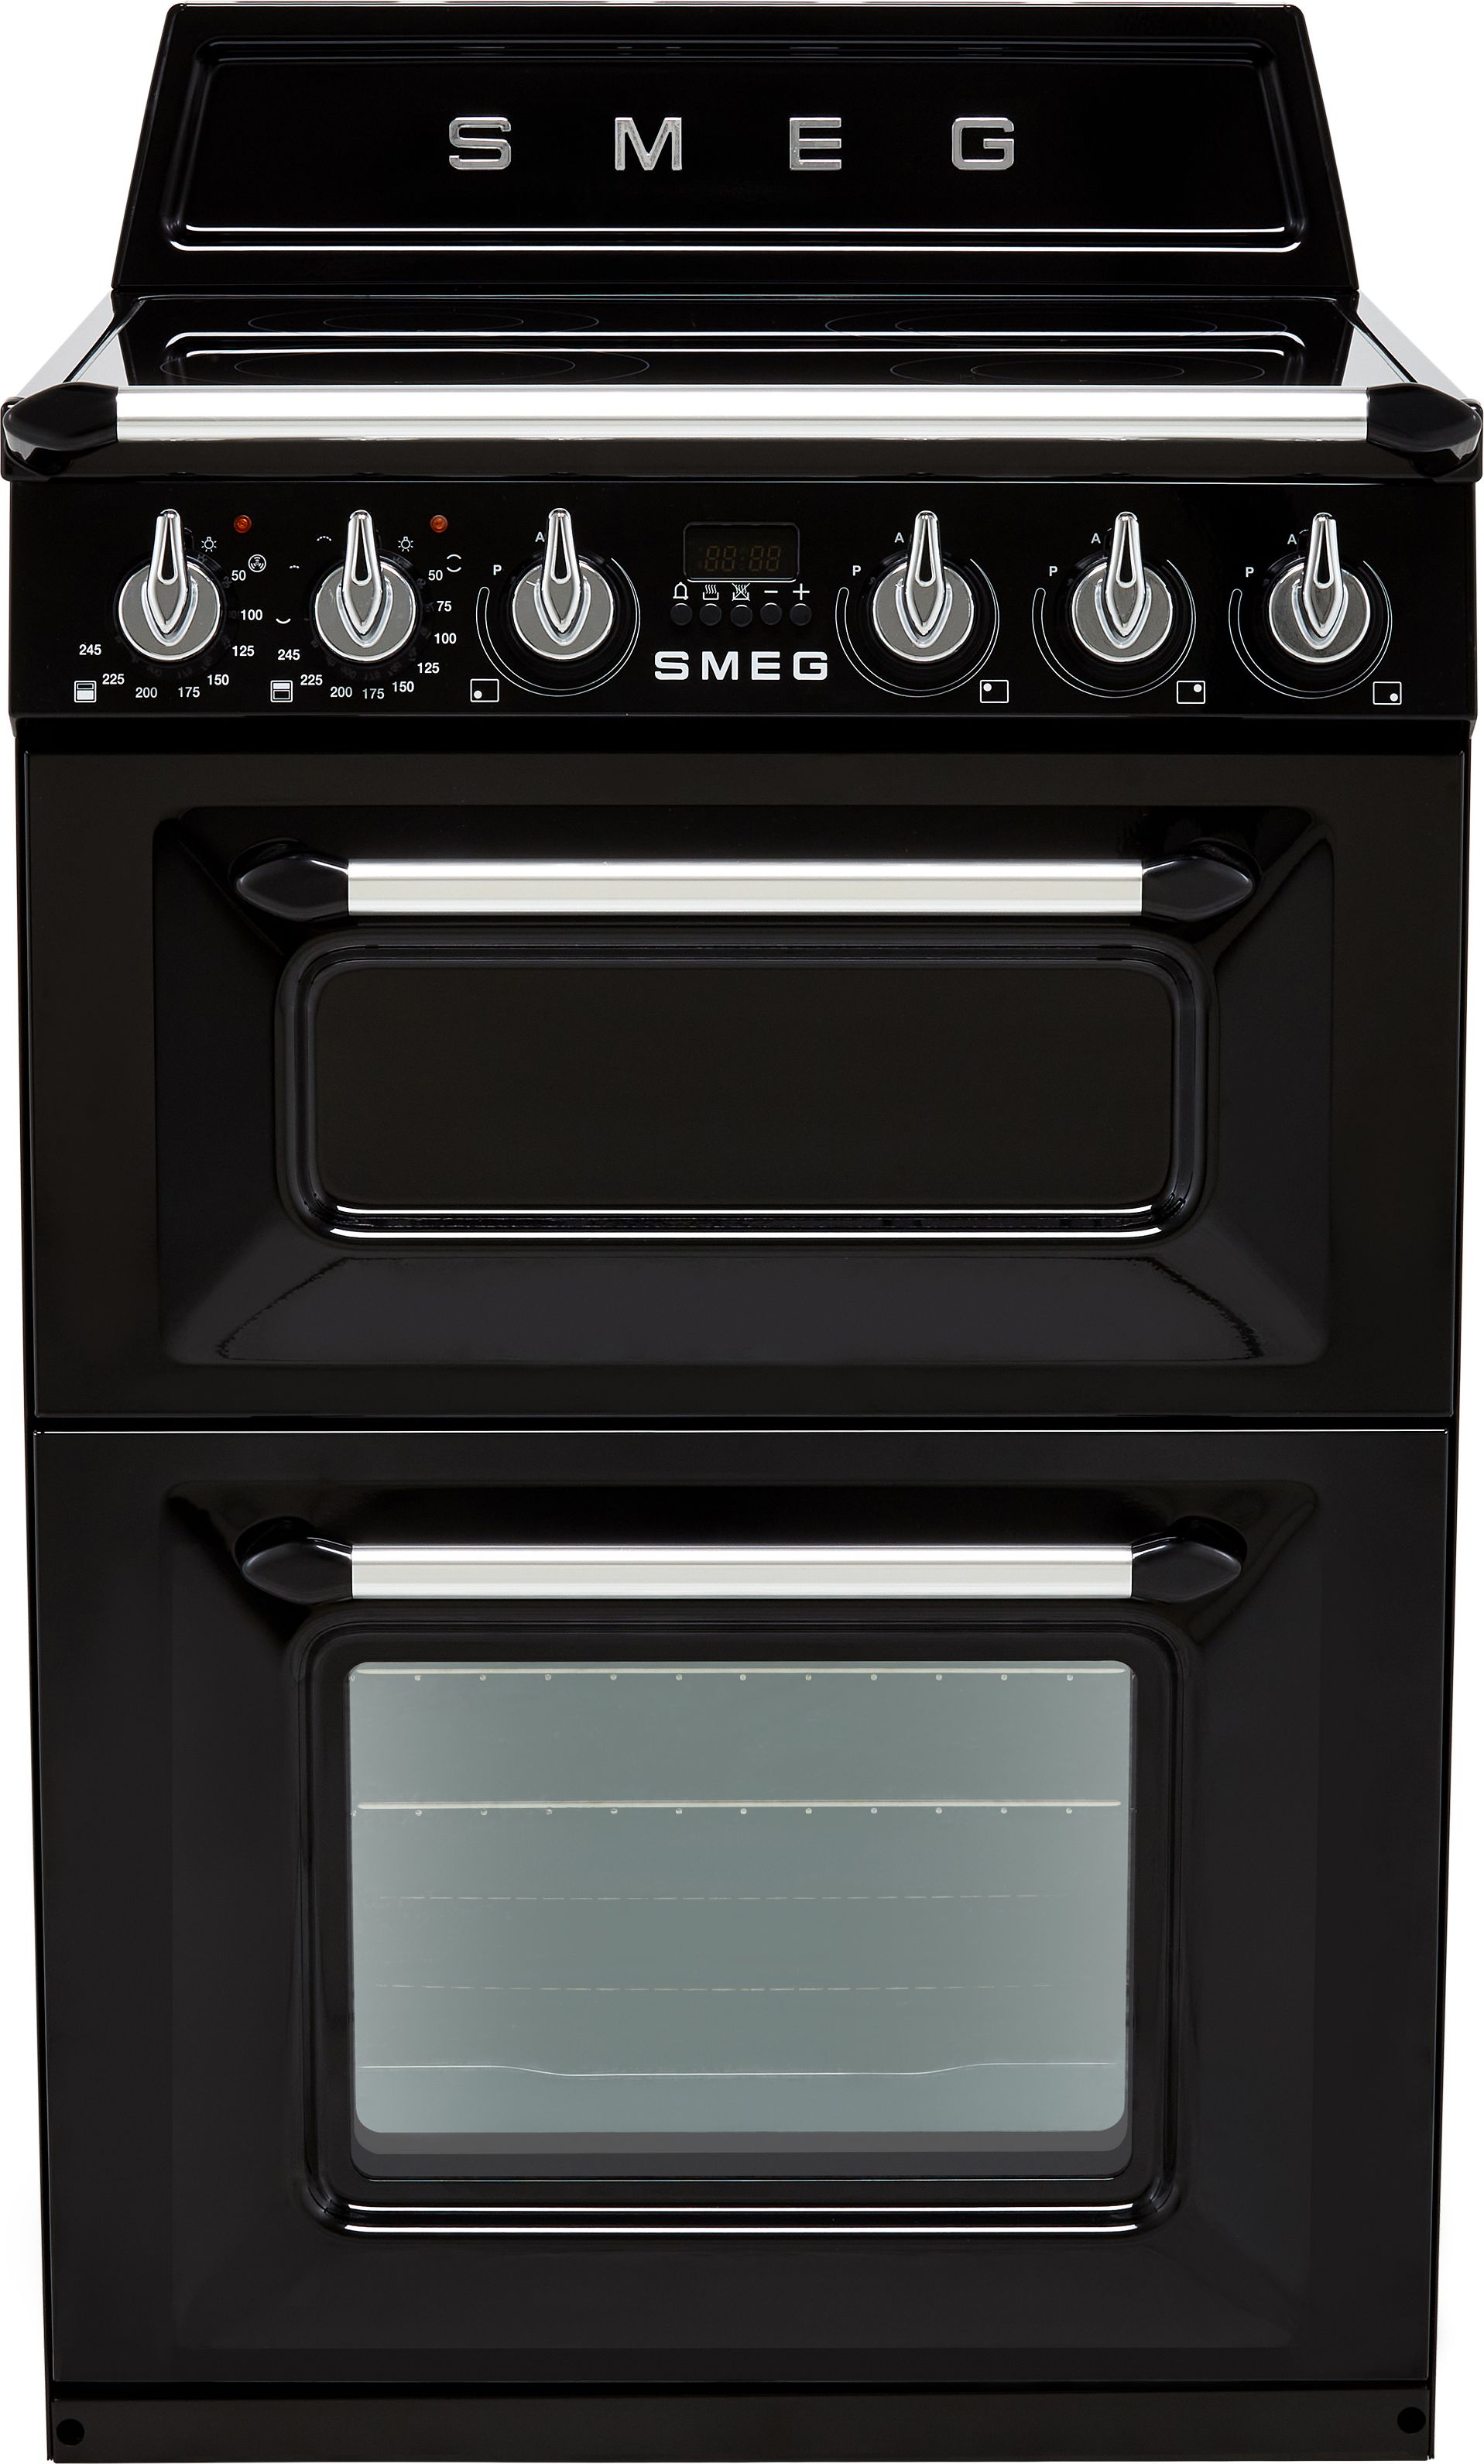 Smeg Victoria TR62IBL2 60cm Electric Cooker with Induction Hob - Black - A/A Rated, Black